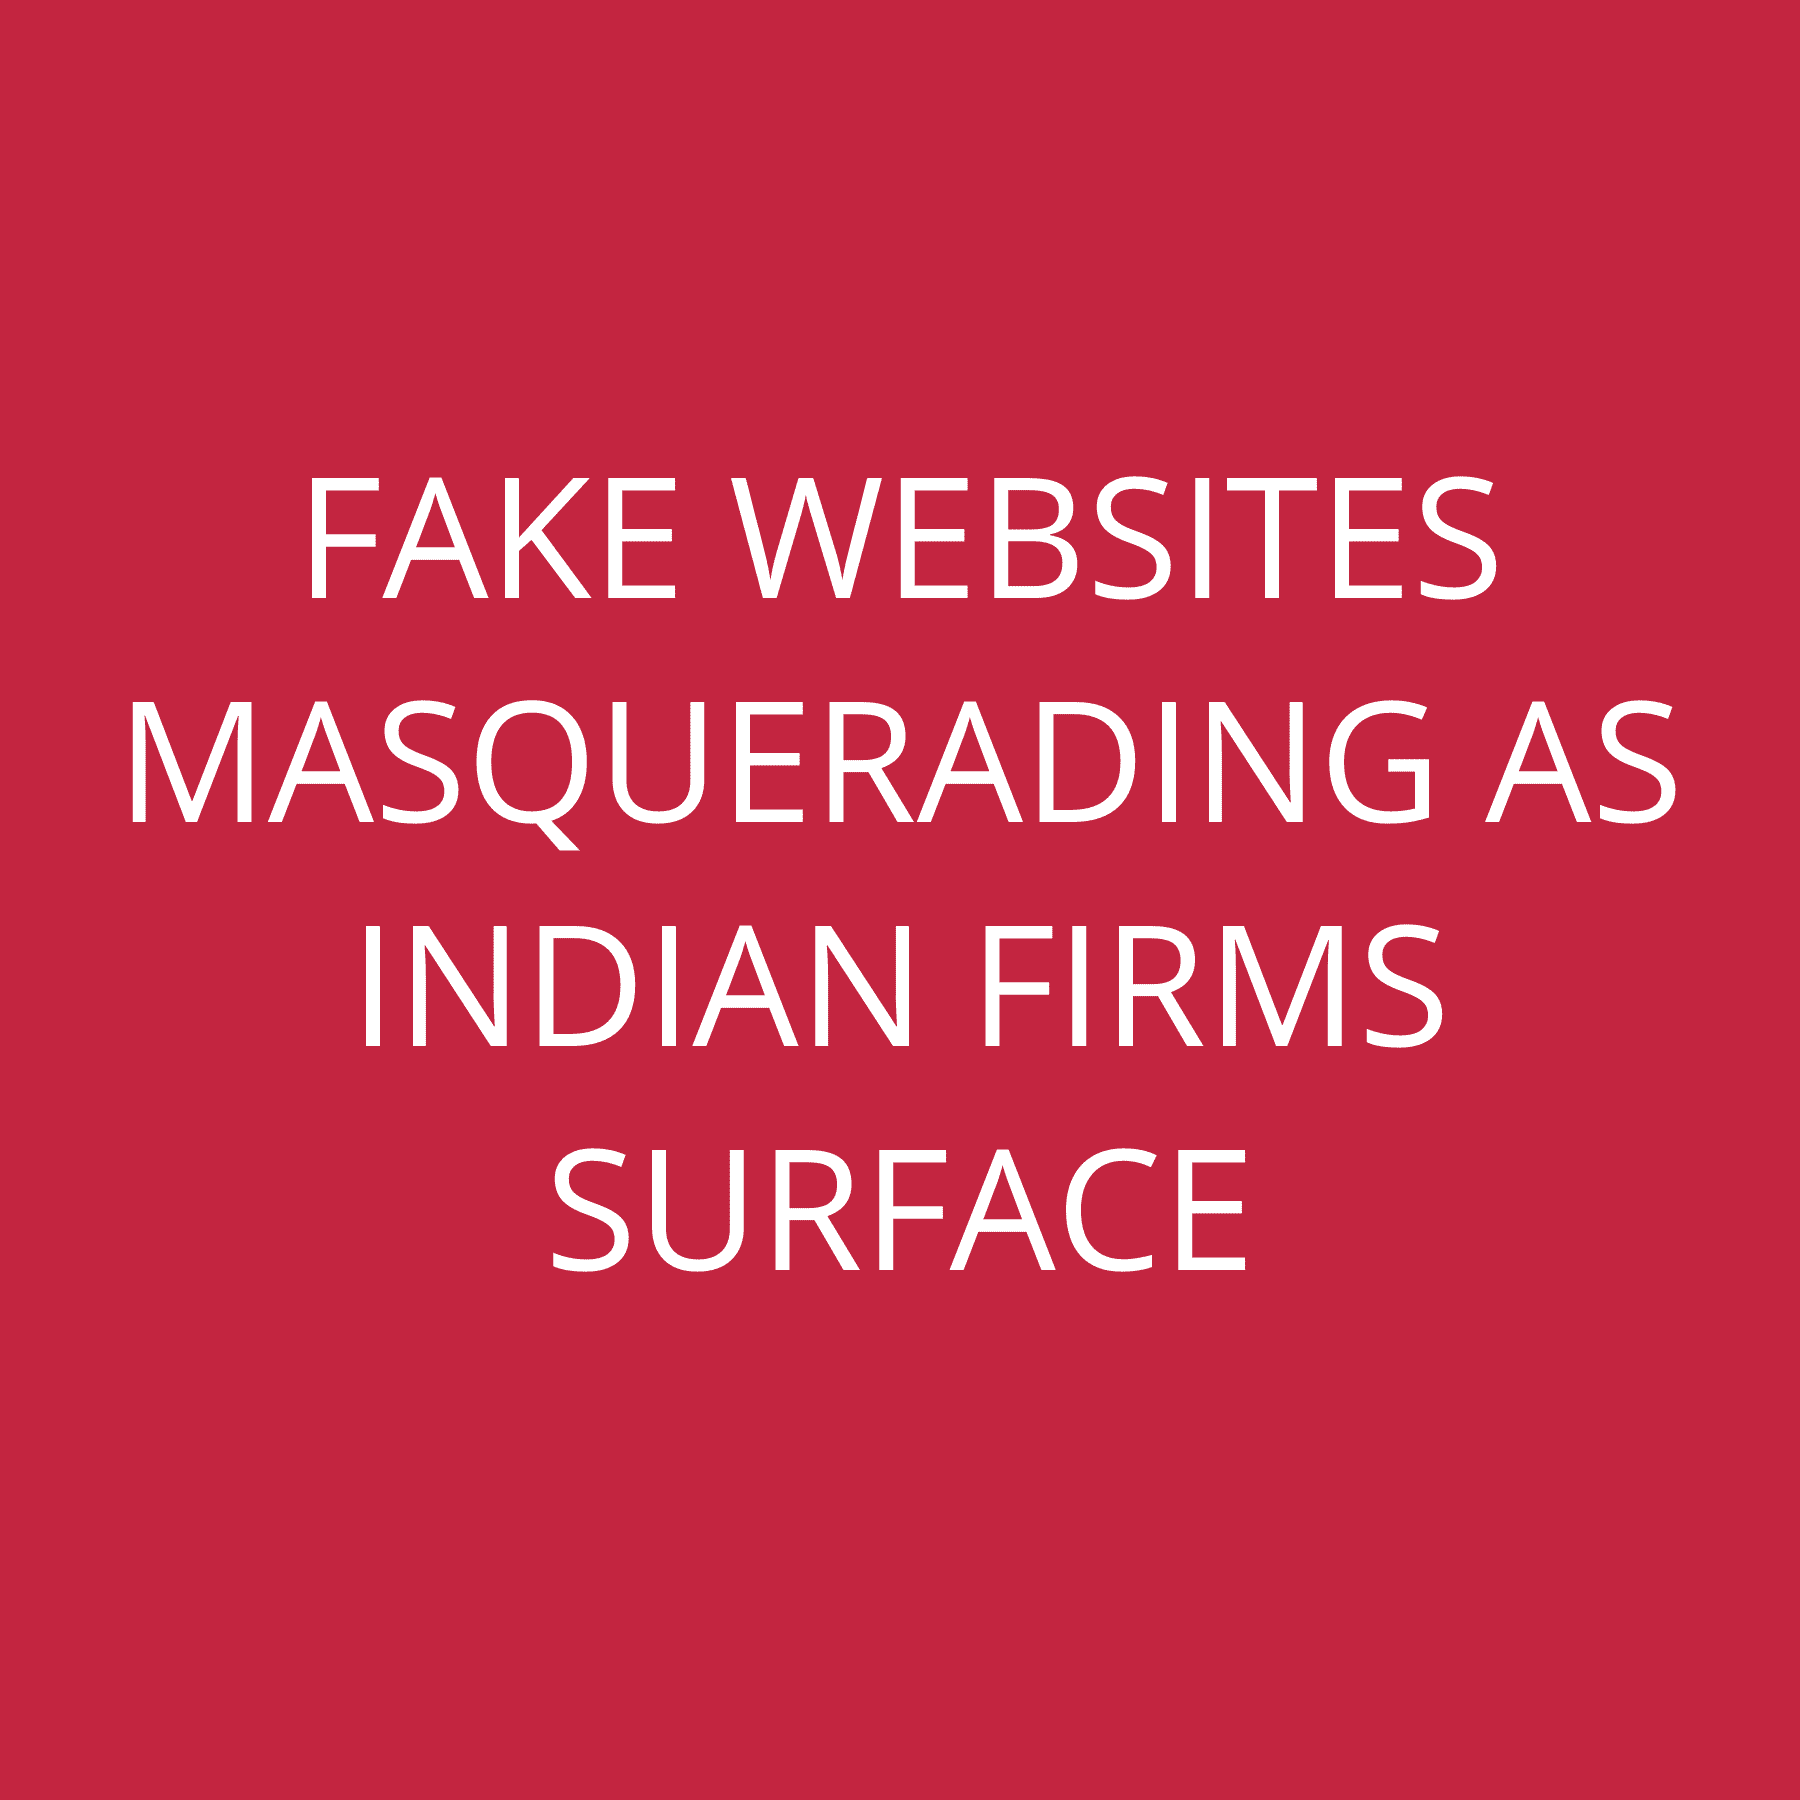 Fake websites masquerading as Indian firms surface